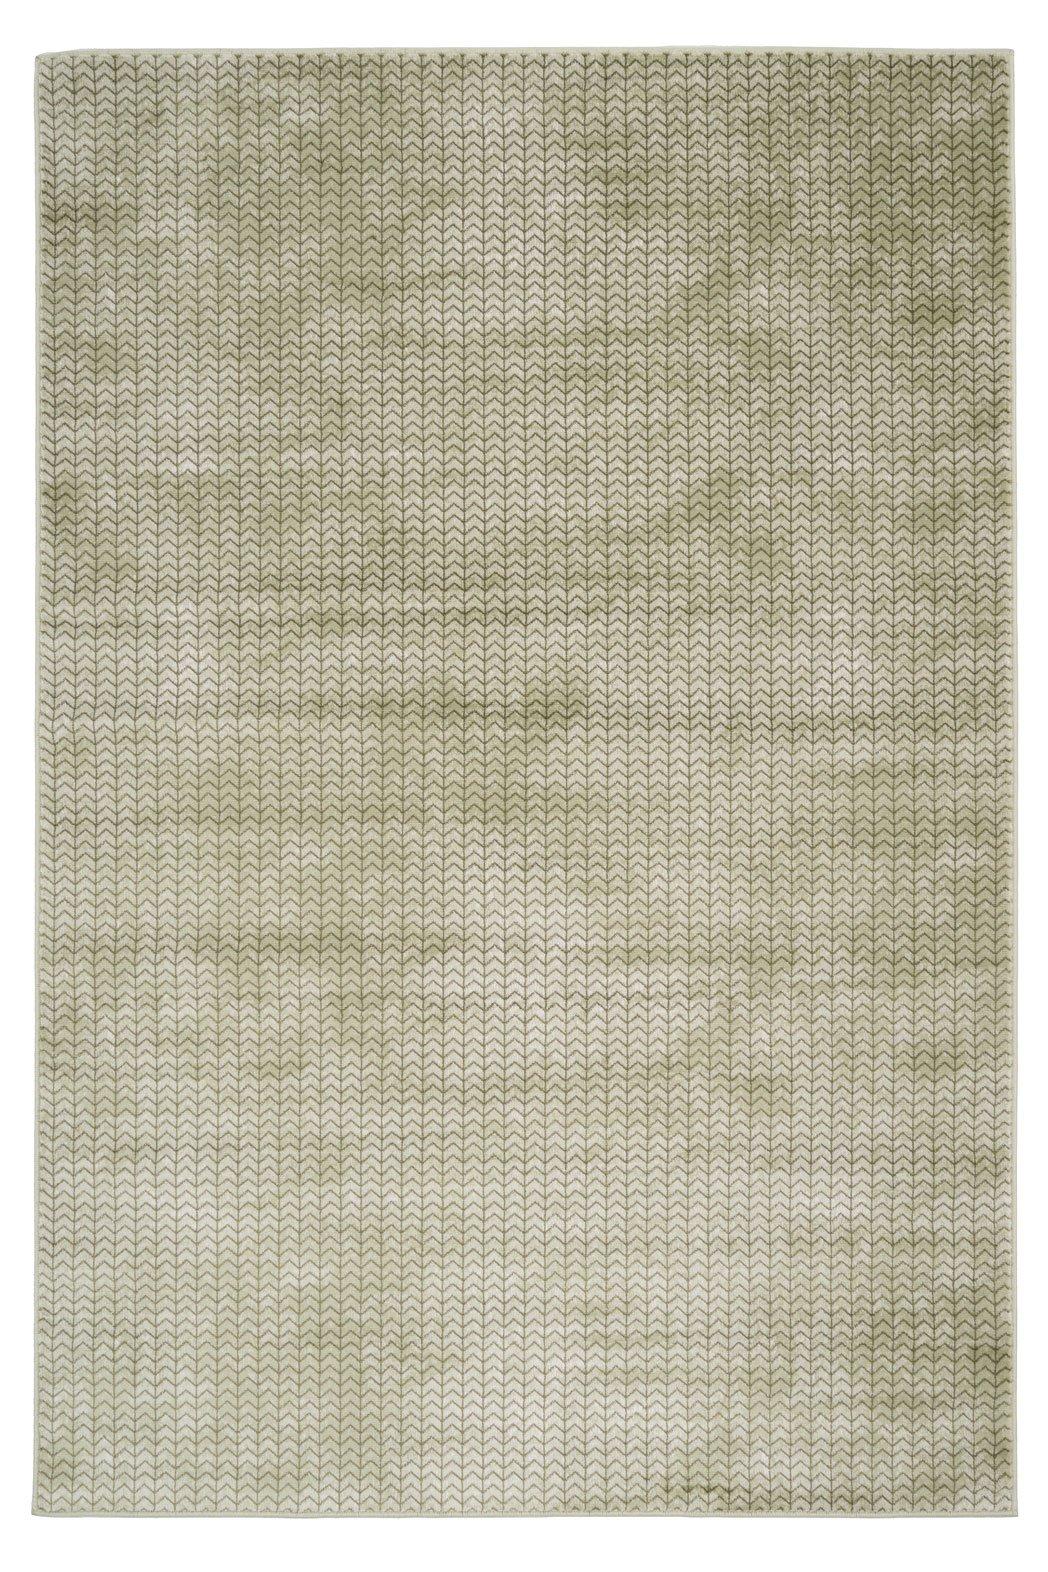 Green Braided Textured Pile Area Rug